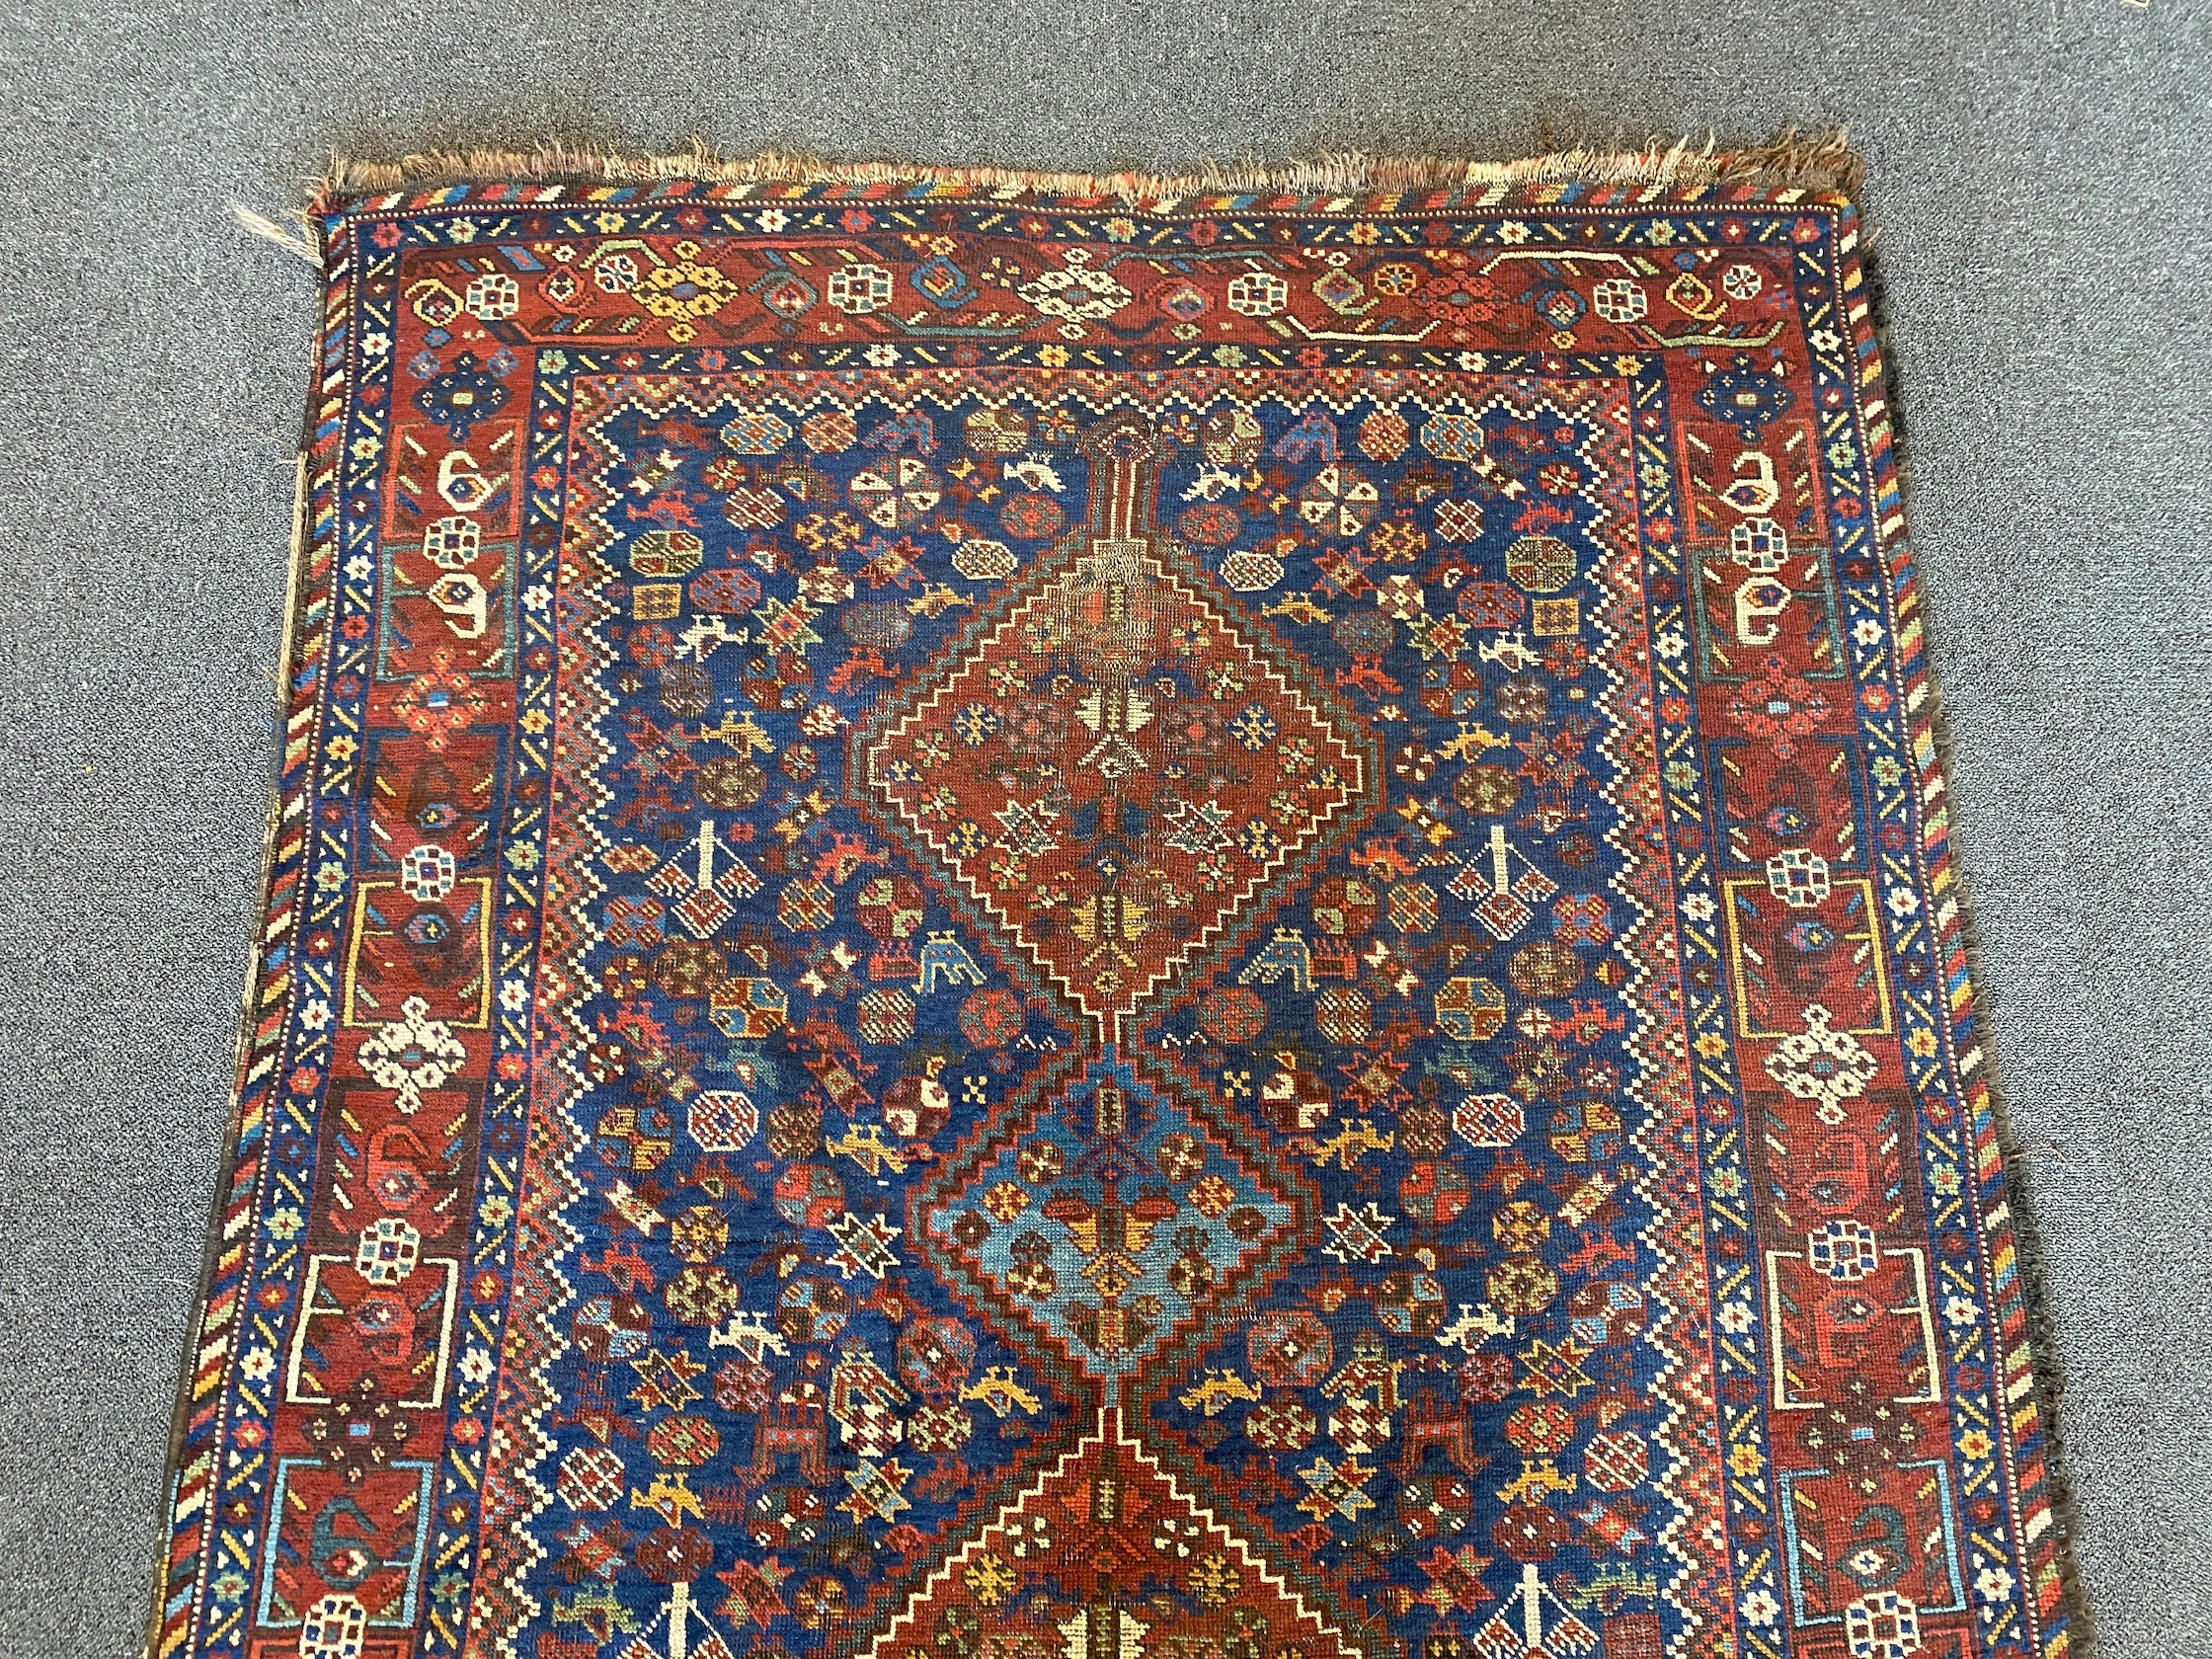 A Shiraz blue ground rug with triple lozenge medallion and floral border 160 x 122 cms.